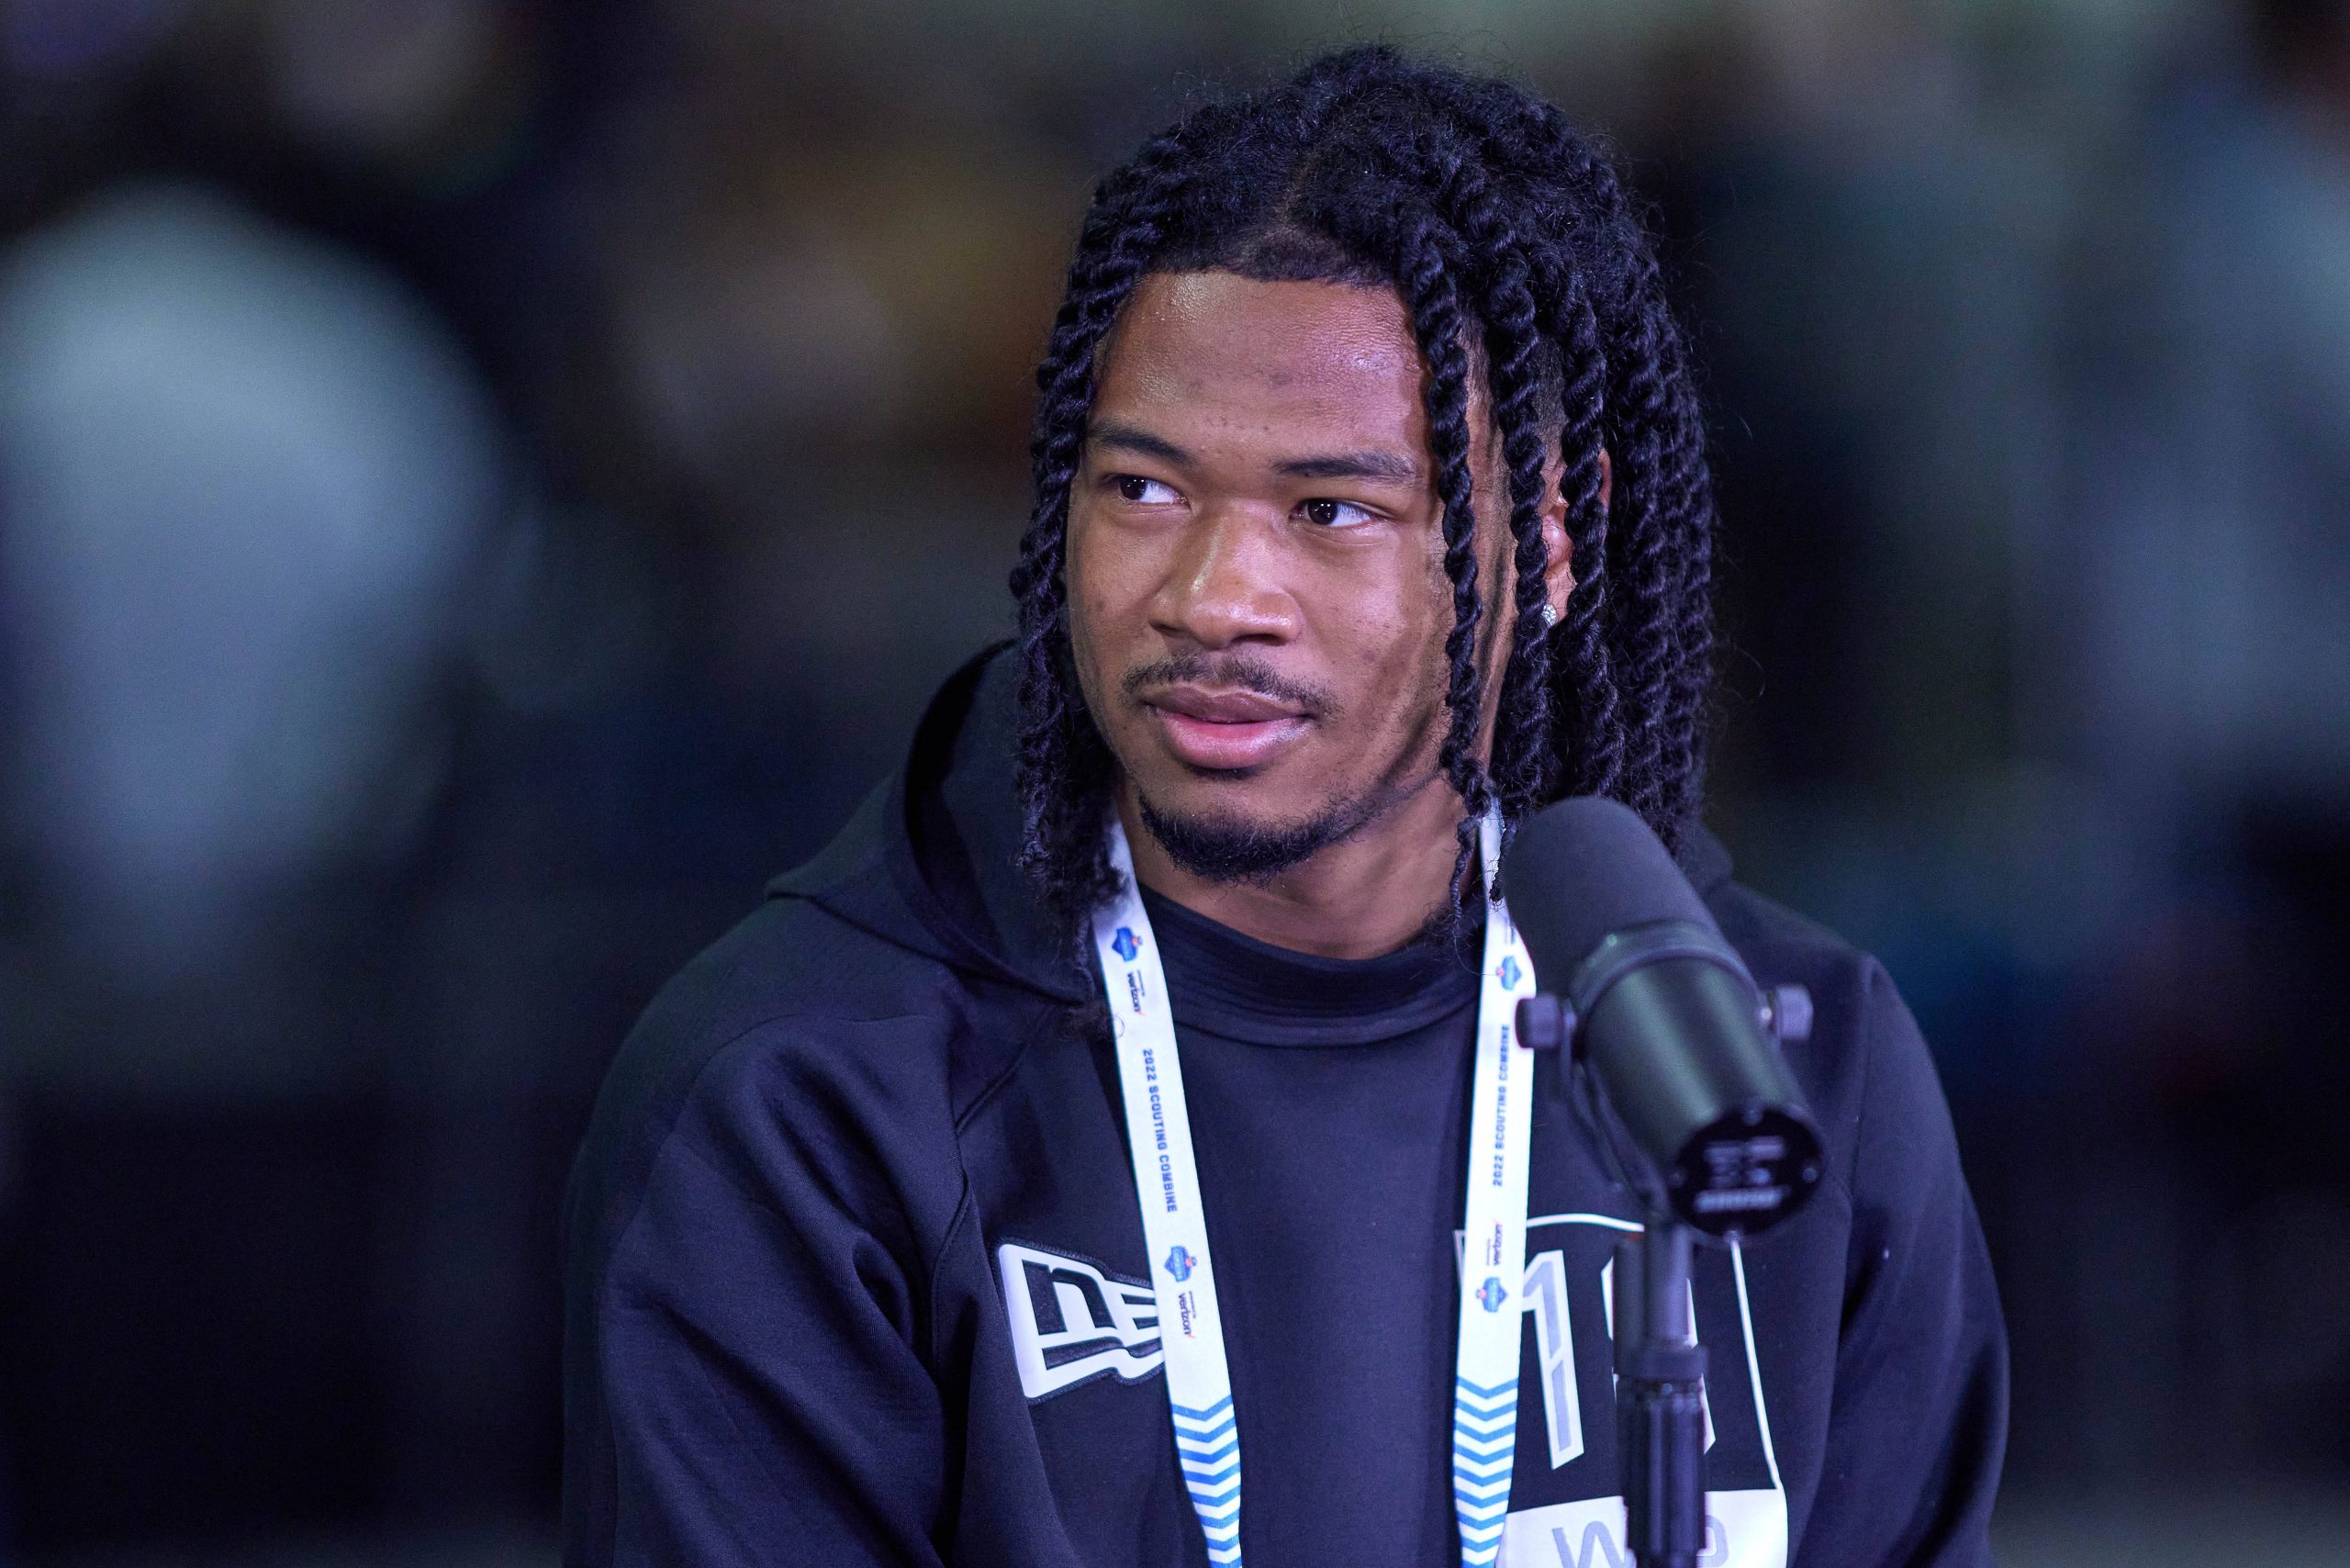 INDIANAPOLIS, IN - MARCH 02: Alabama wide receiver John Metchie answers questions from the media during the NFL, American Football Herren, USA Scouting Combine on March 2, 2022, at the Indiana Convention Center in Indianapolis, IN. Photo by Robin Alam/Icon Sportswire NFL: MAR 02 Scouting Combline Icon164220302293